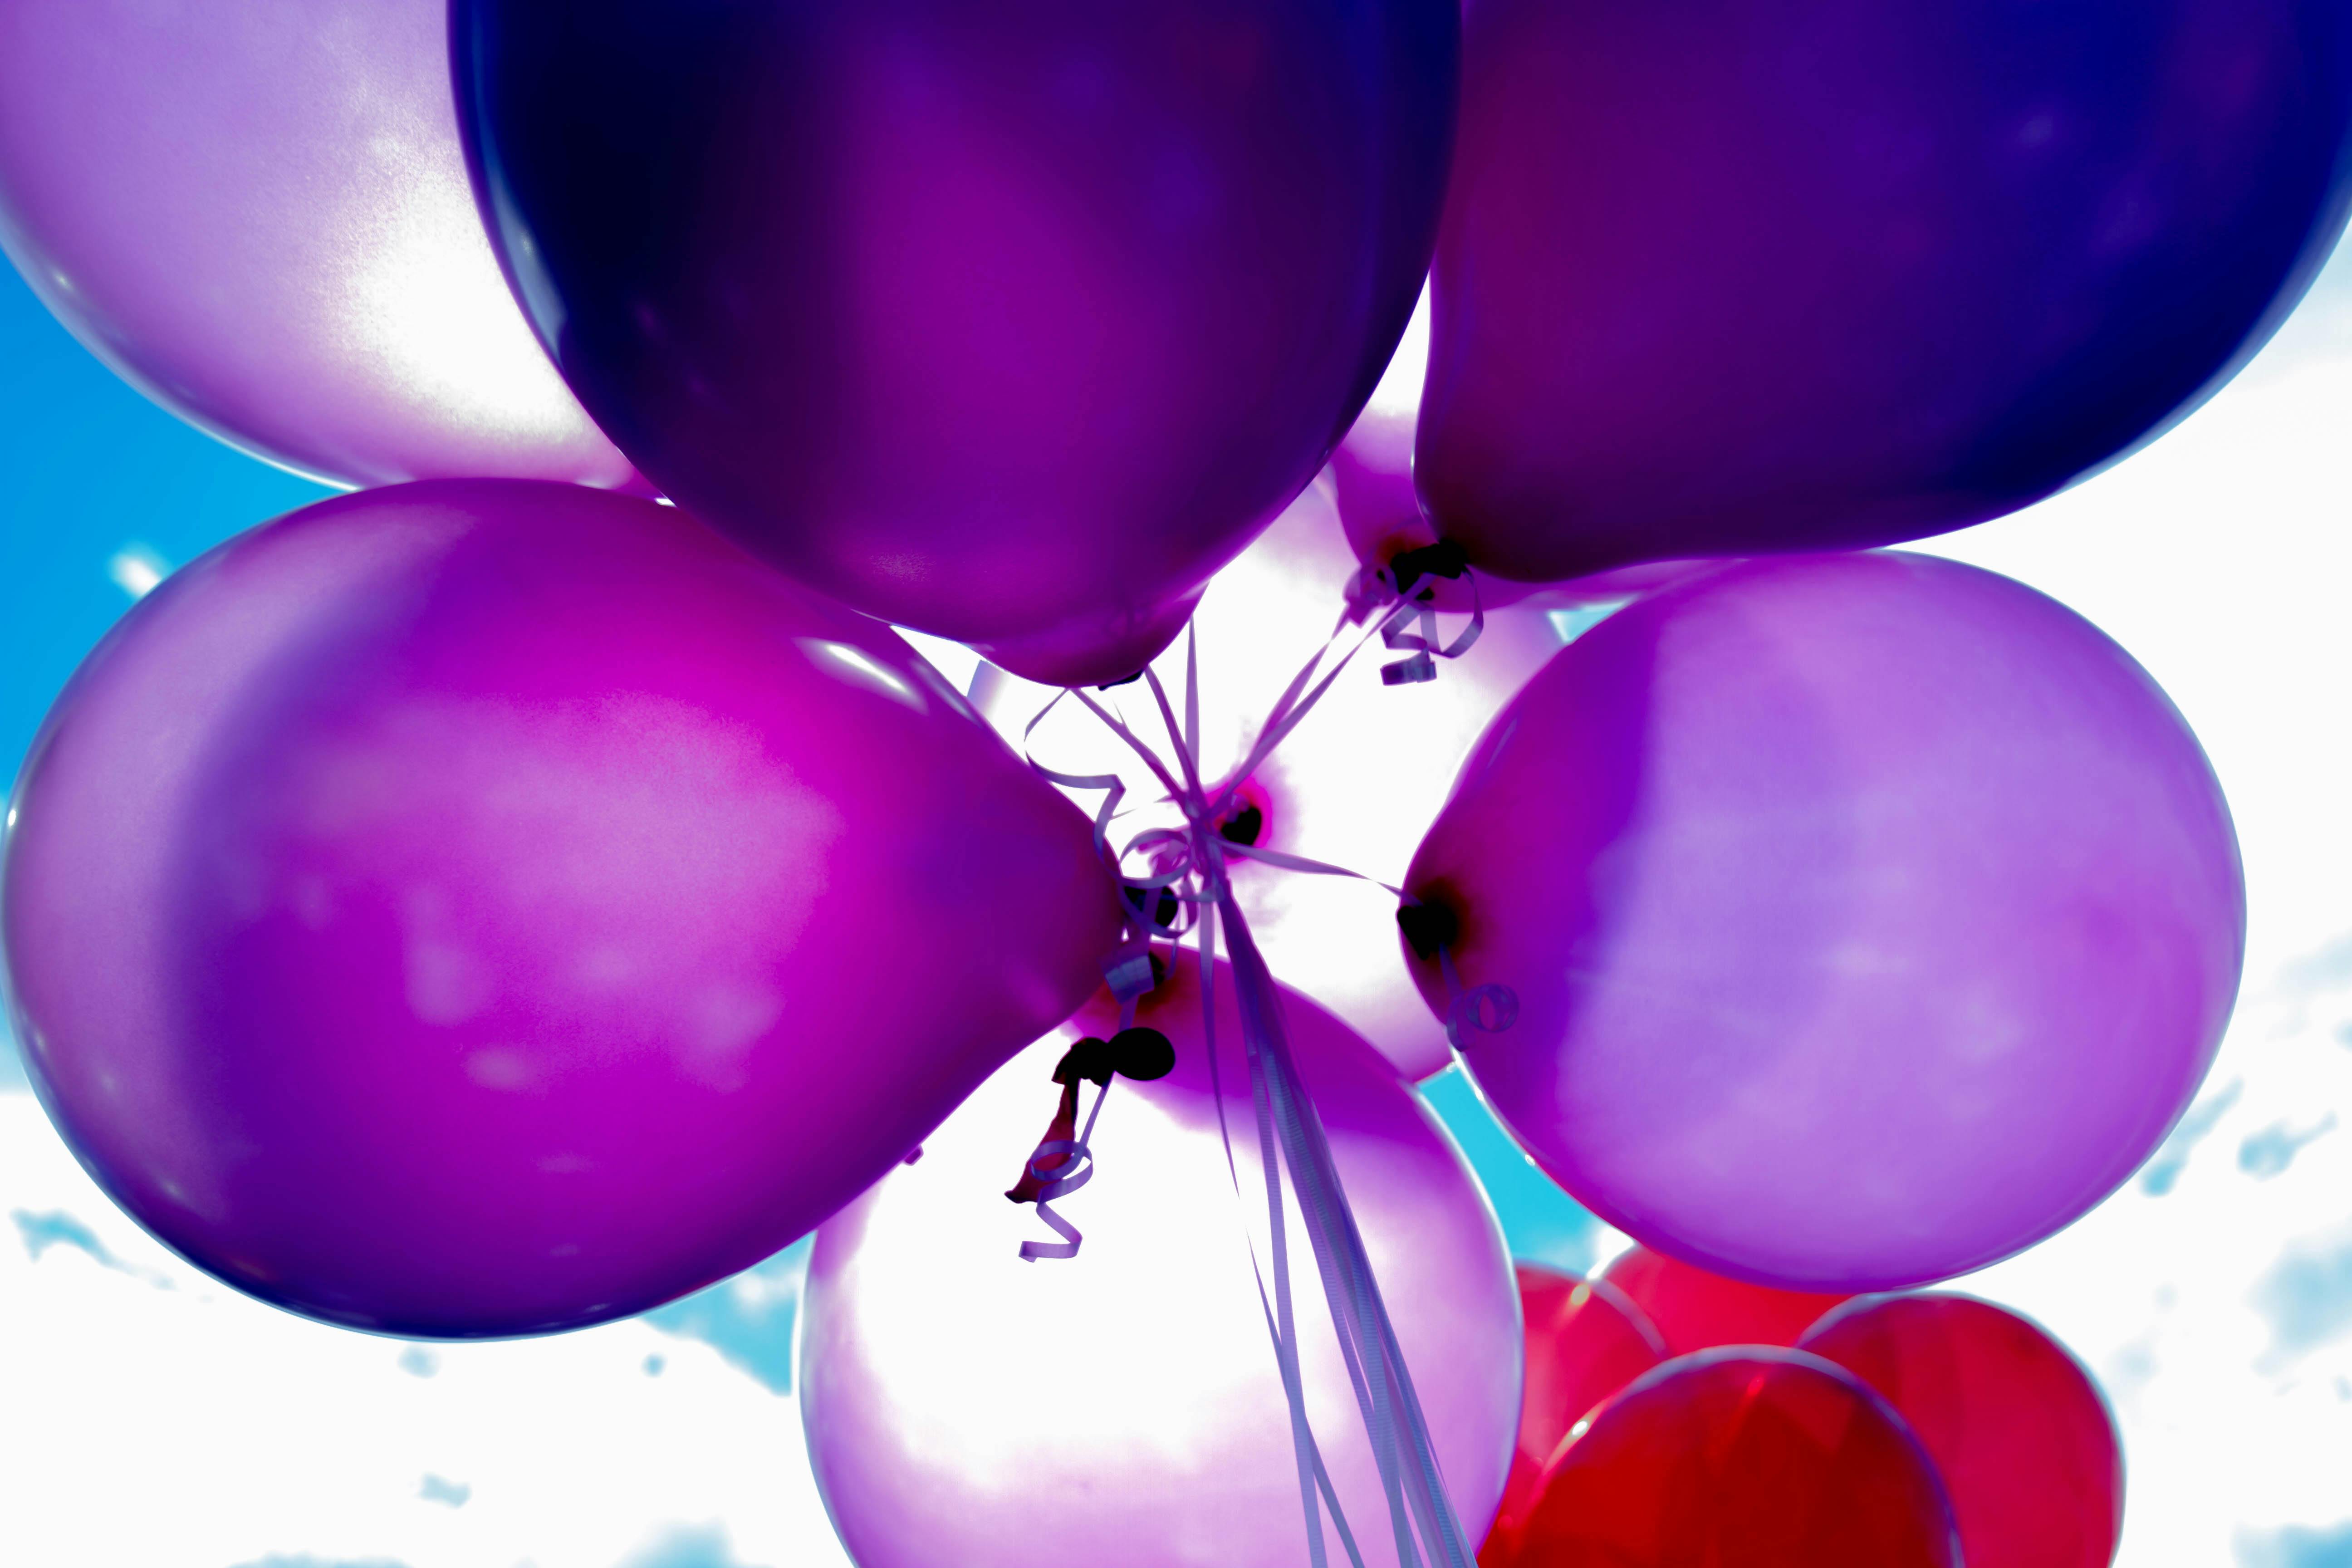 189,072 Ballons Royalty-Free Images, Stock Photos & Pictures